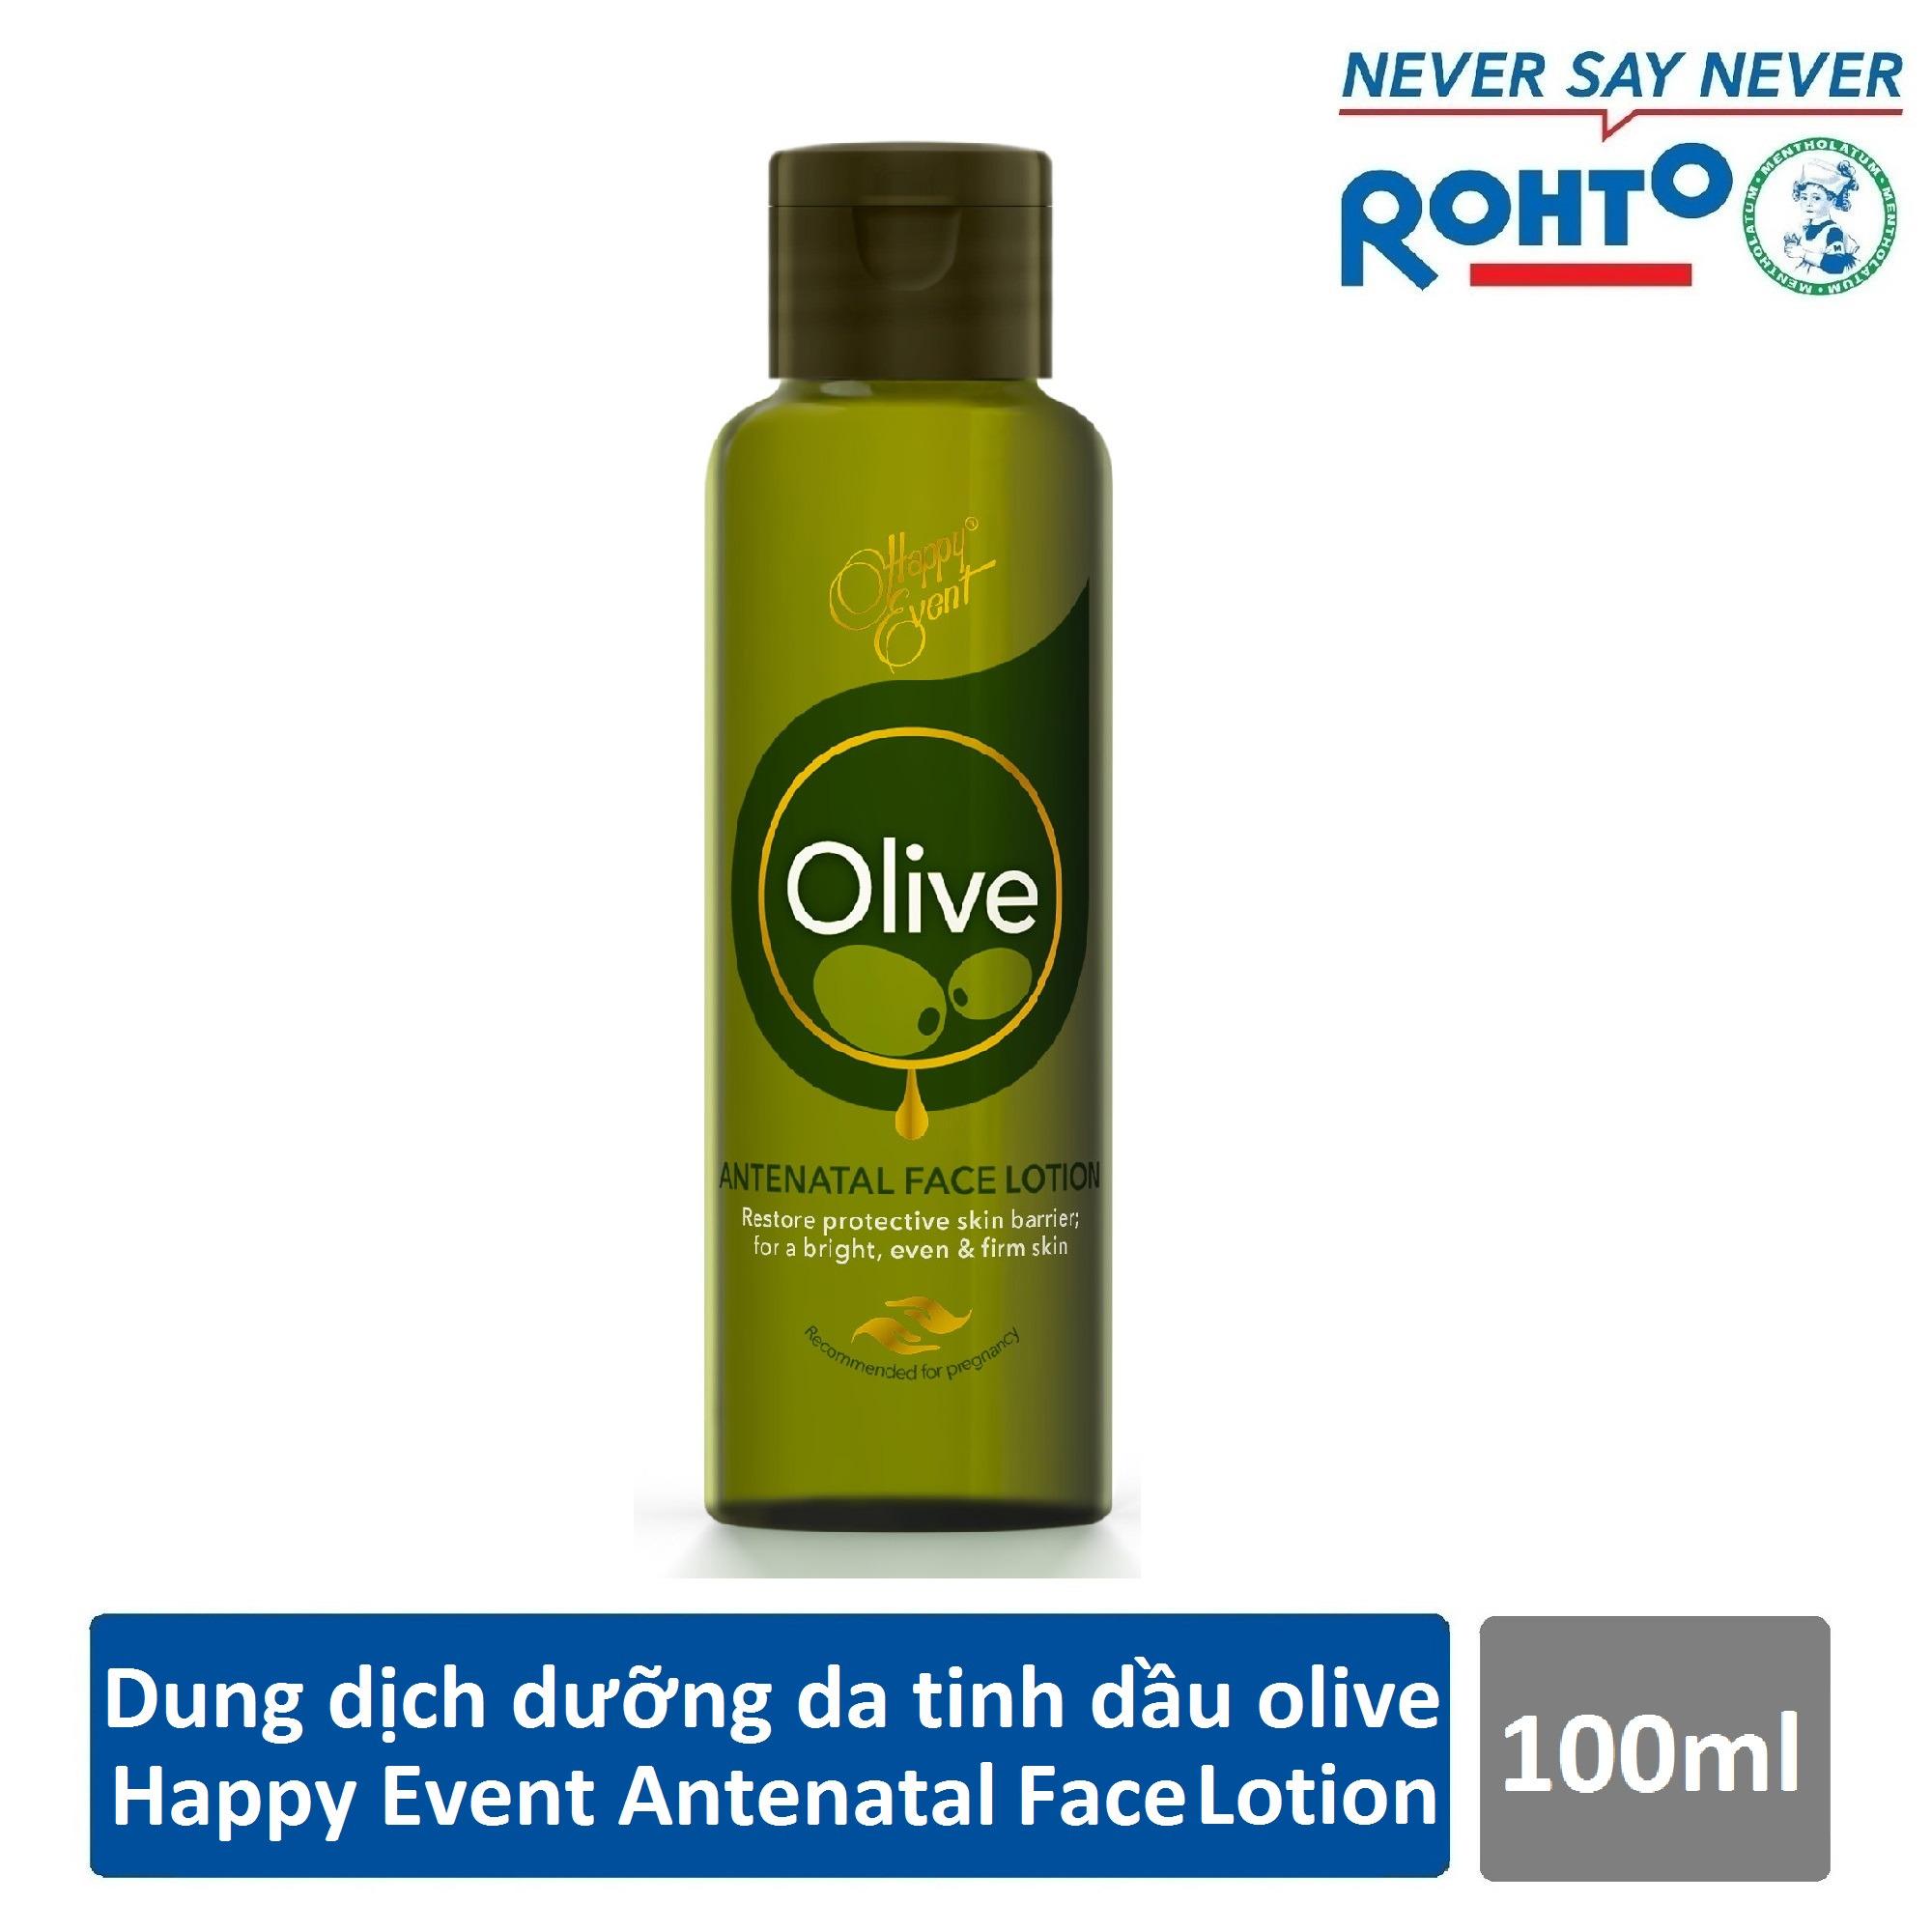 Dung dịch dưỡng da tinh dầu olive Happy Event Antenatal Face Lotion 100ml